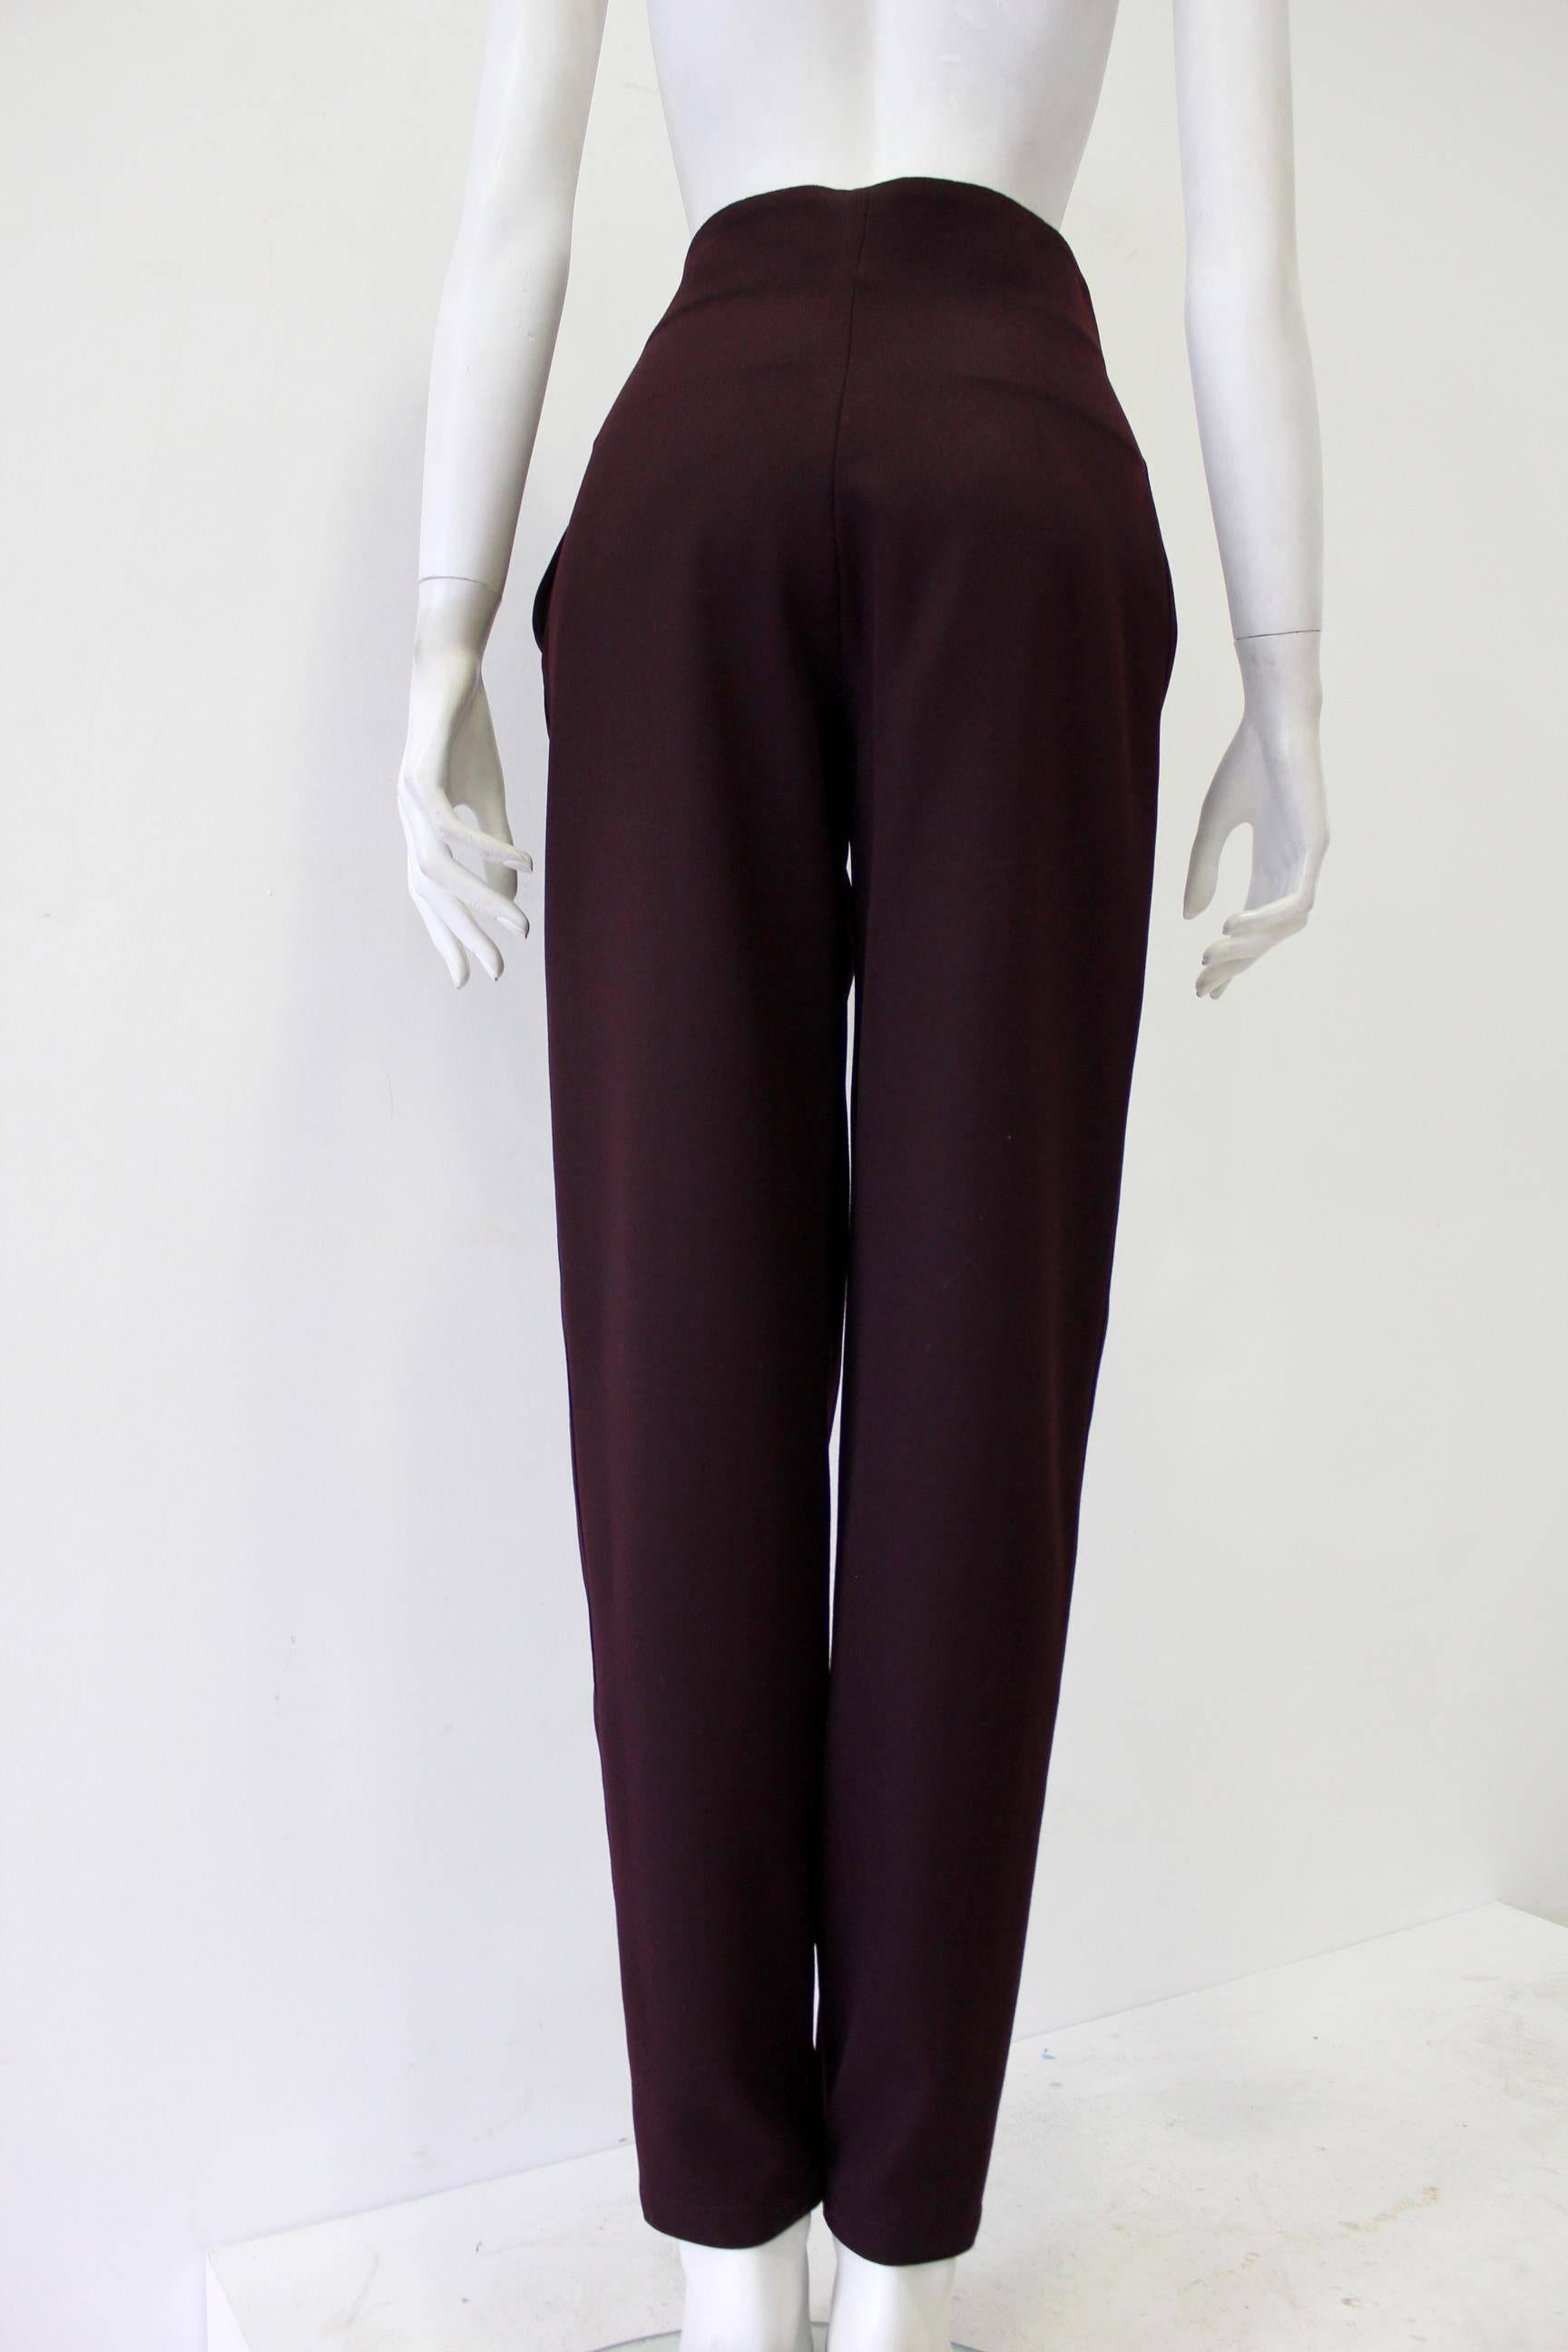 Exceptional Gianni Versace Burgundy Wool High Waisted Trousers Featuring An Abstract Black Embroidery Front And Zip Ankle.